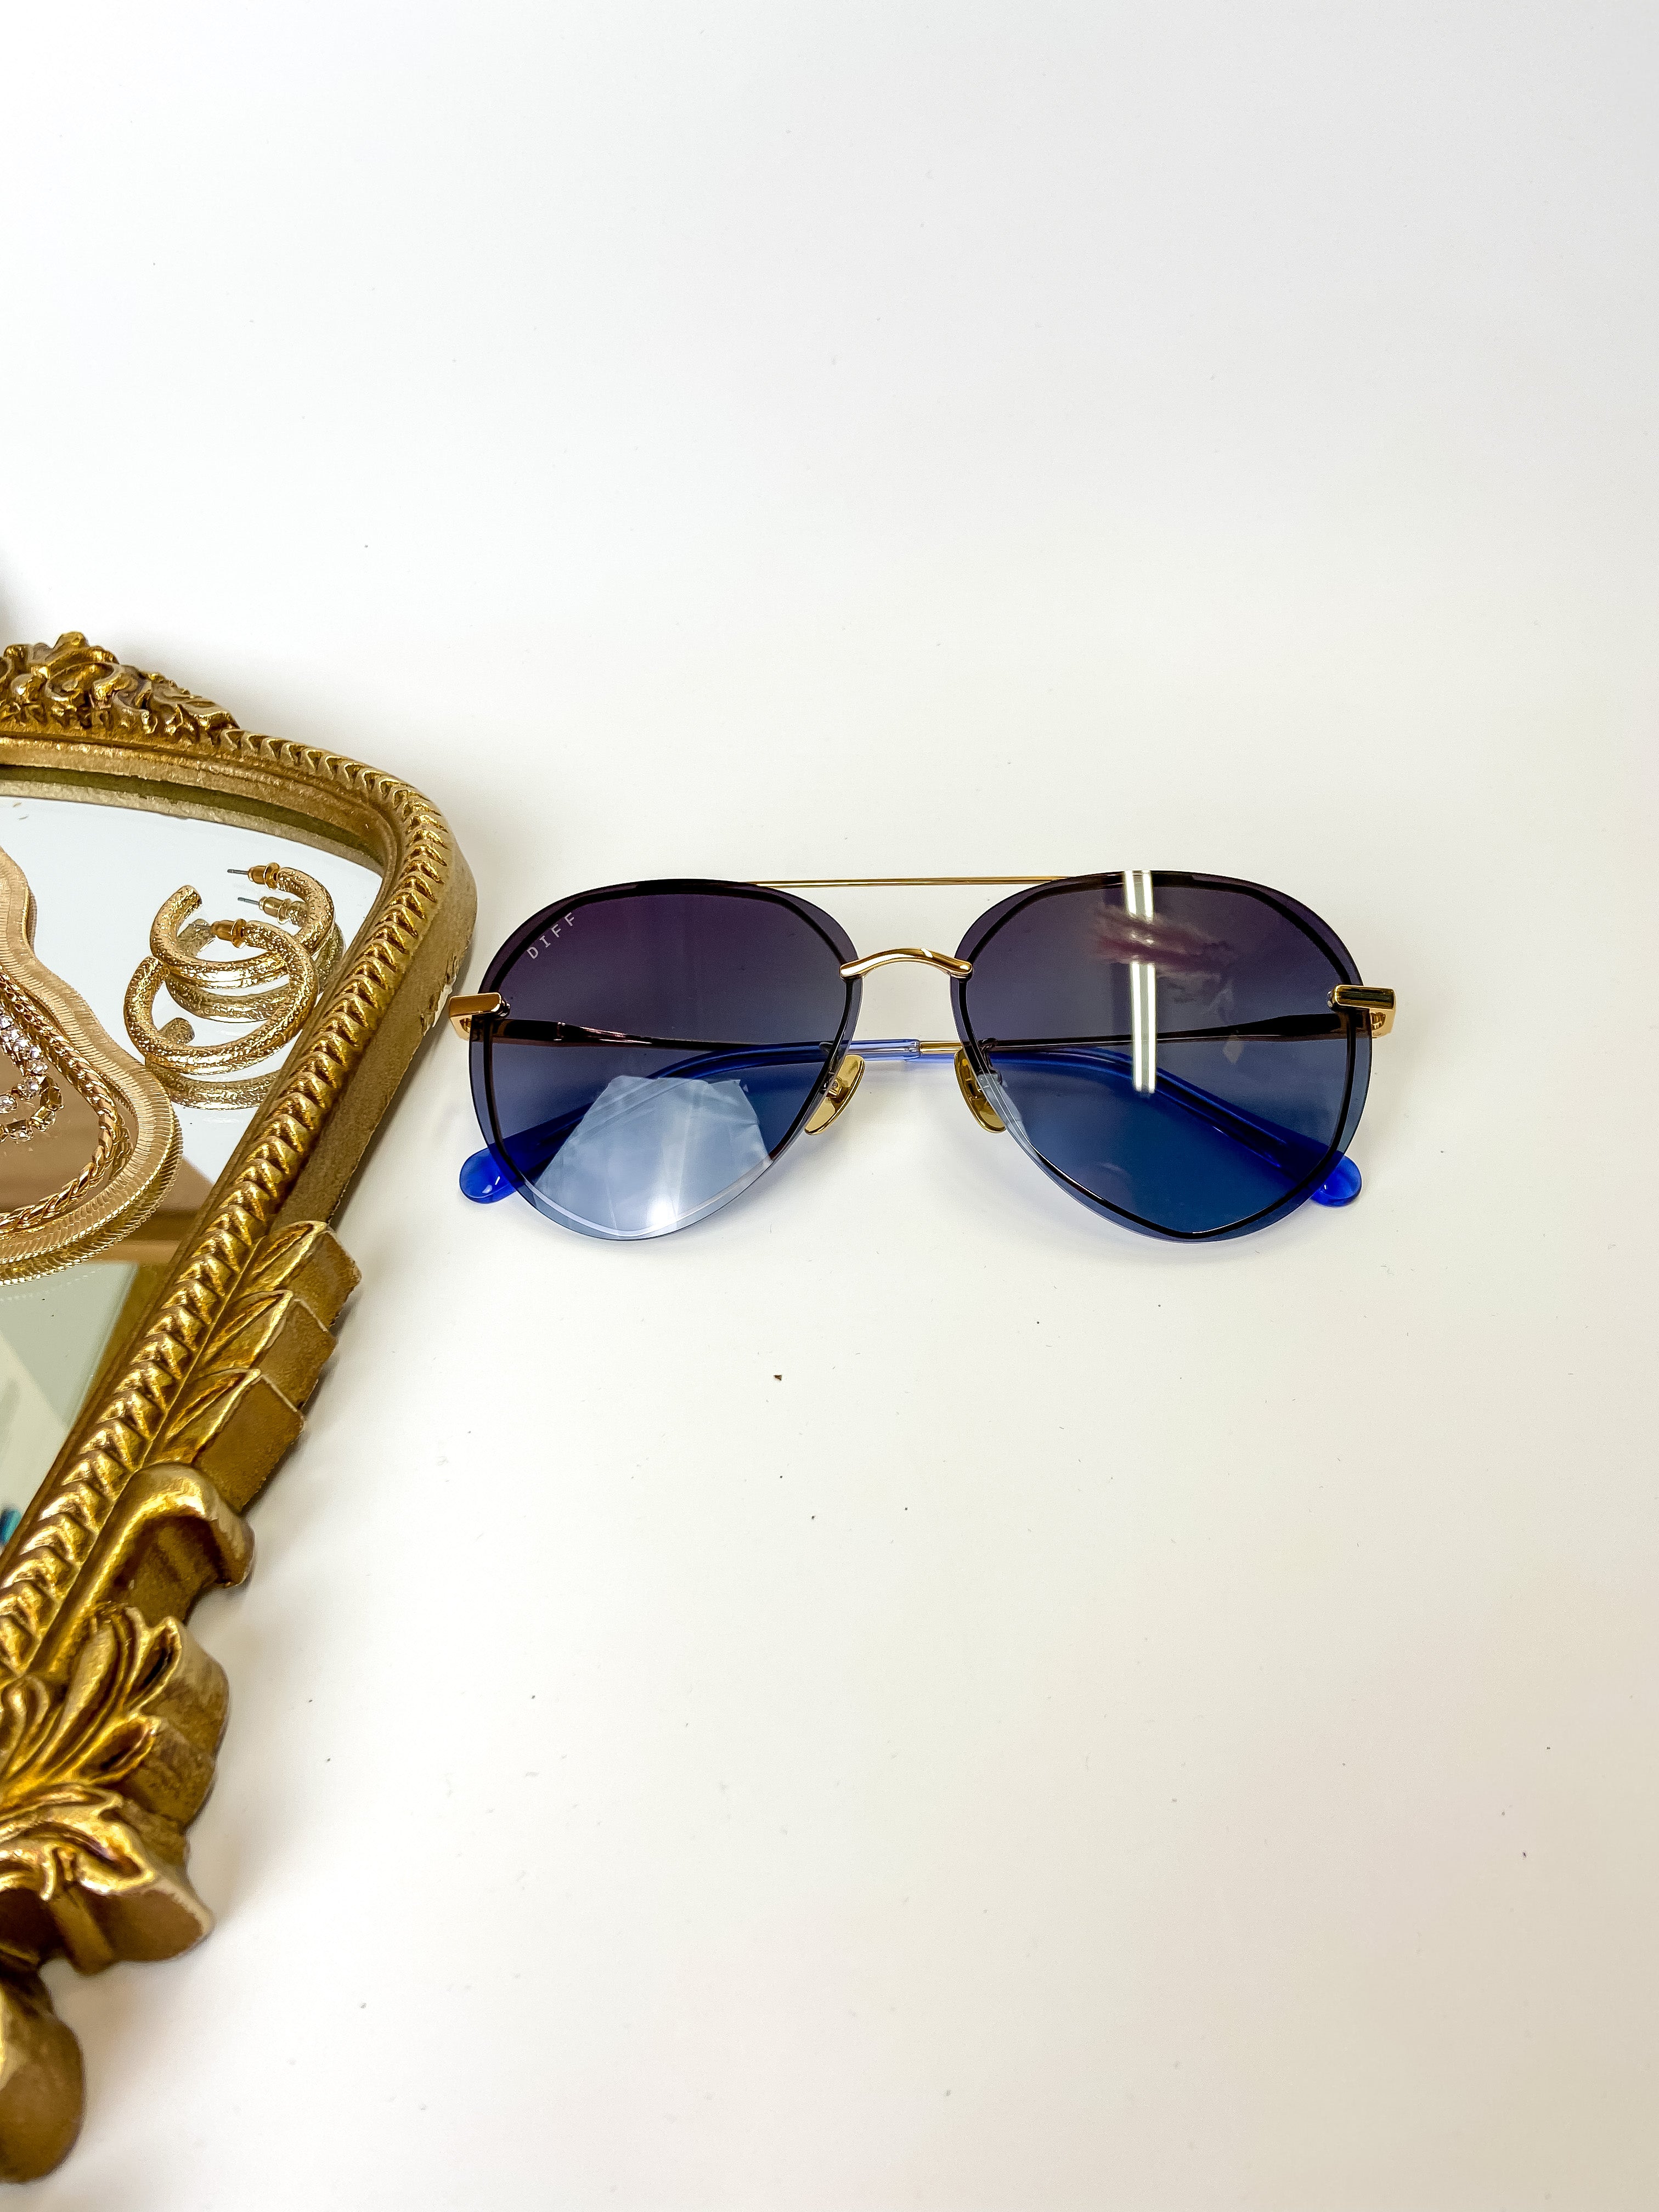 DIFF | Lenox Polarized Blue Gradient Lens Sunglasses in Gold Tone - Giddy Up Glamour Boutique